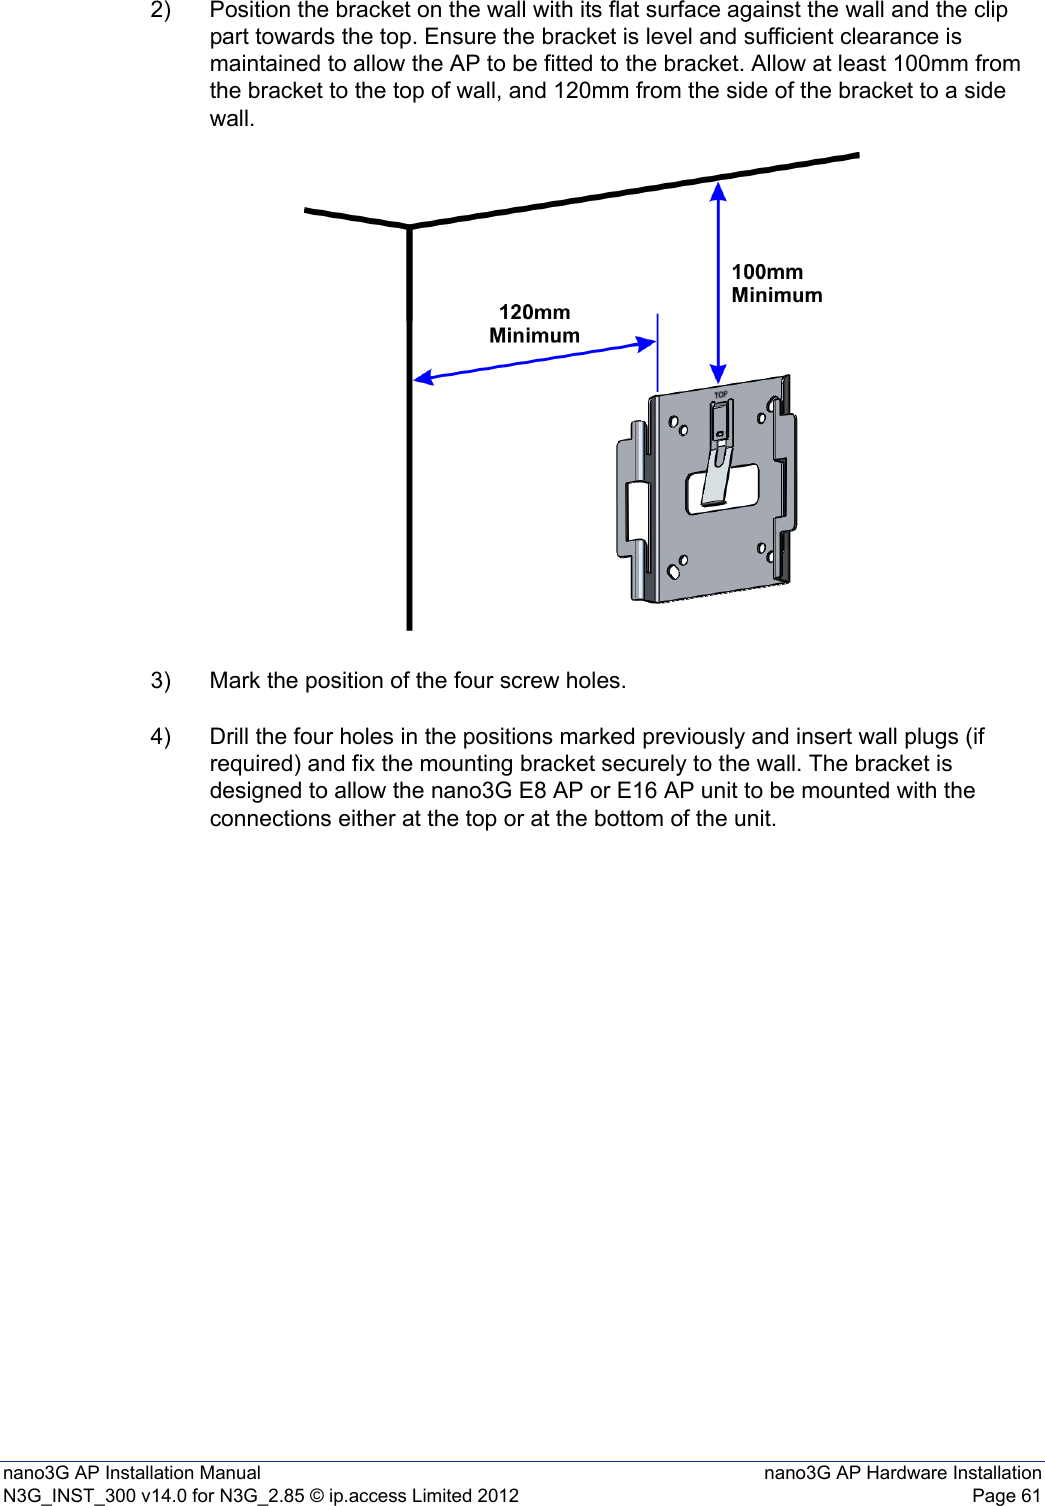 nano3G AP Installation Manual nano3G AP Hardware InstallationN3G_INST_300 v14.0 for N3G_2.85 © ip.access Limited 2012 Page 612) Position the bracket on the wall with its flat surface against the wall and the clip part towards the top. Ensure the bracket is level and sufficient clearance is maintained to allow the AP to be fitted to the bracket. Allow at least 100mm from the bracket to the top of wall, and 120mm from the side of the bracket to a side wall.3) Mark the position of the four screw holes.4) Drill the four holes in the positions marked previously and insert wall plugs (if required) and fix the mounting bracket securely to the wall. The bracket is designed to allow the nano3G E8 AP or E16 AP unit to be mounted with the connections either at the top or at the bottom of the unit.